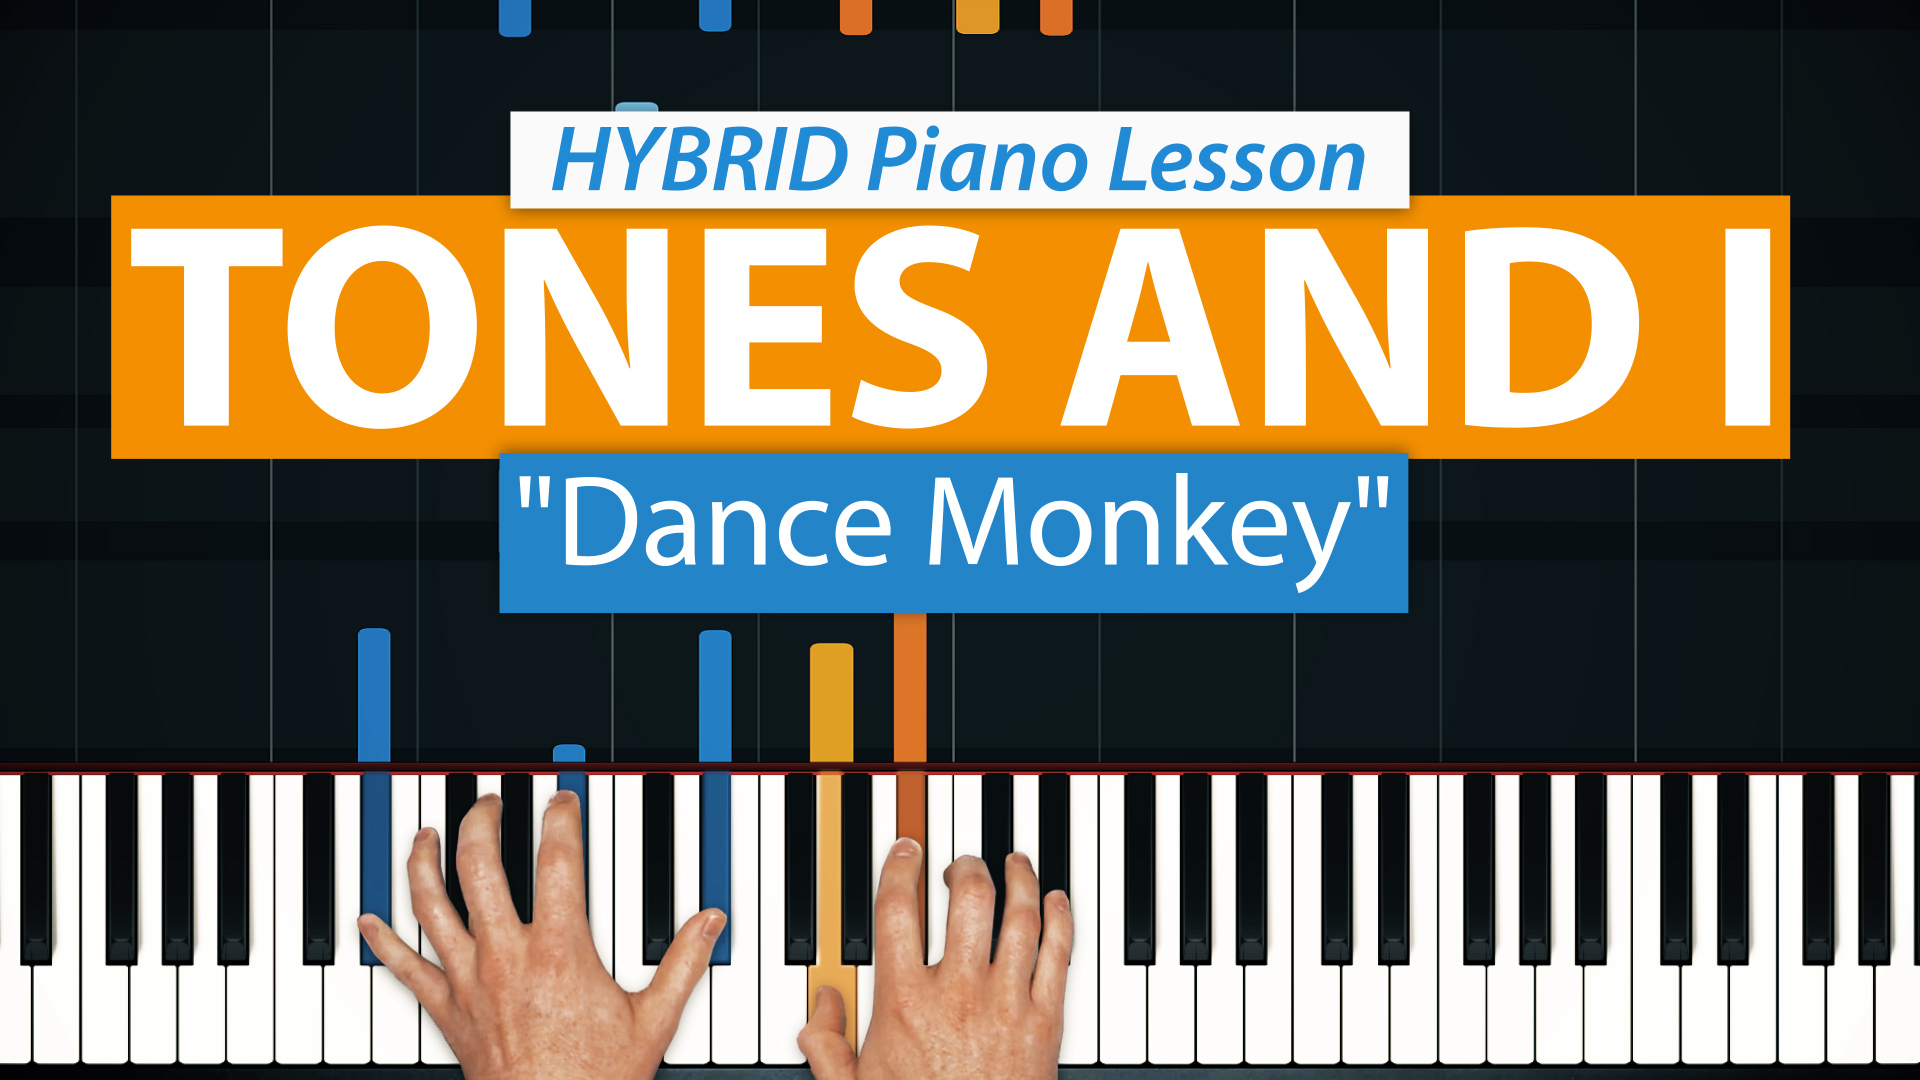 Roblox Piano Sheets Dance Monkey Easyfashion Products Discount Online Store All Products Cheaper Than Retail Price Free Delivery Returns Easy Returns And Exchanges - roblox dance monkey piano sheet